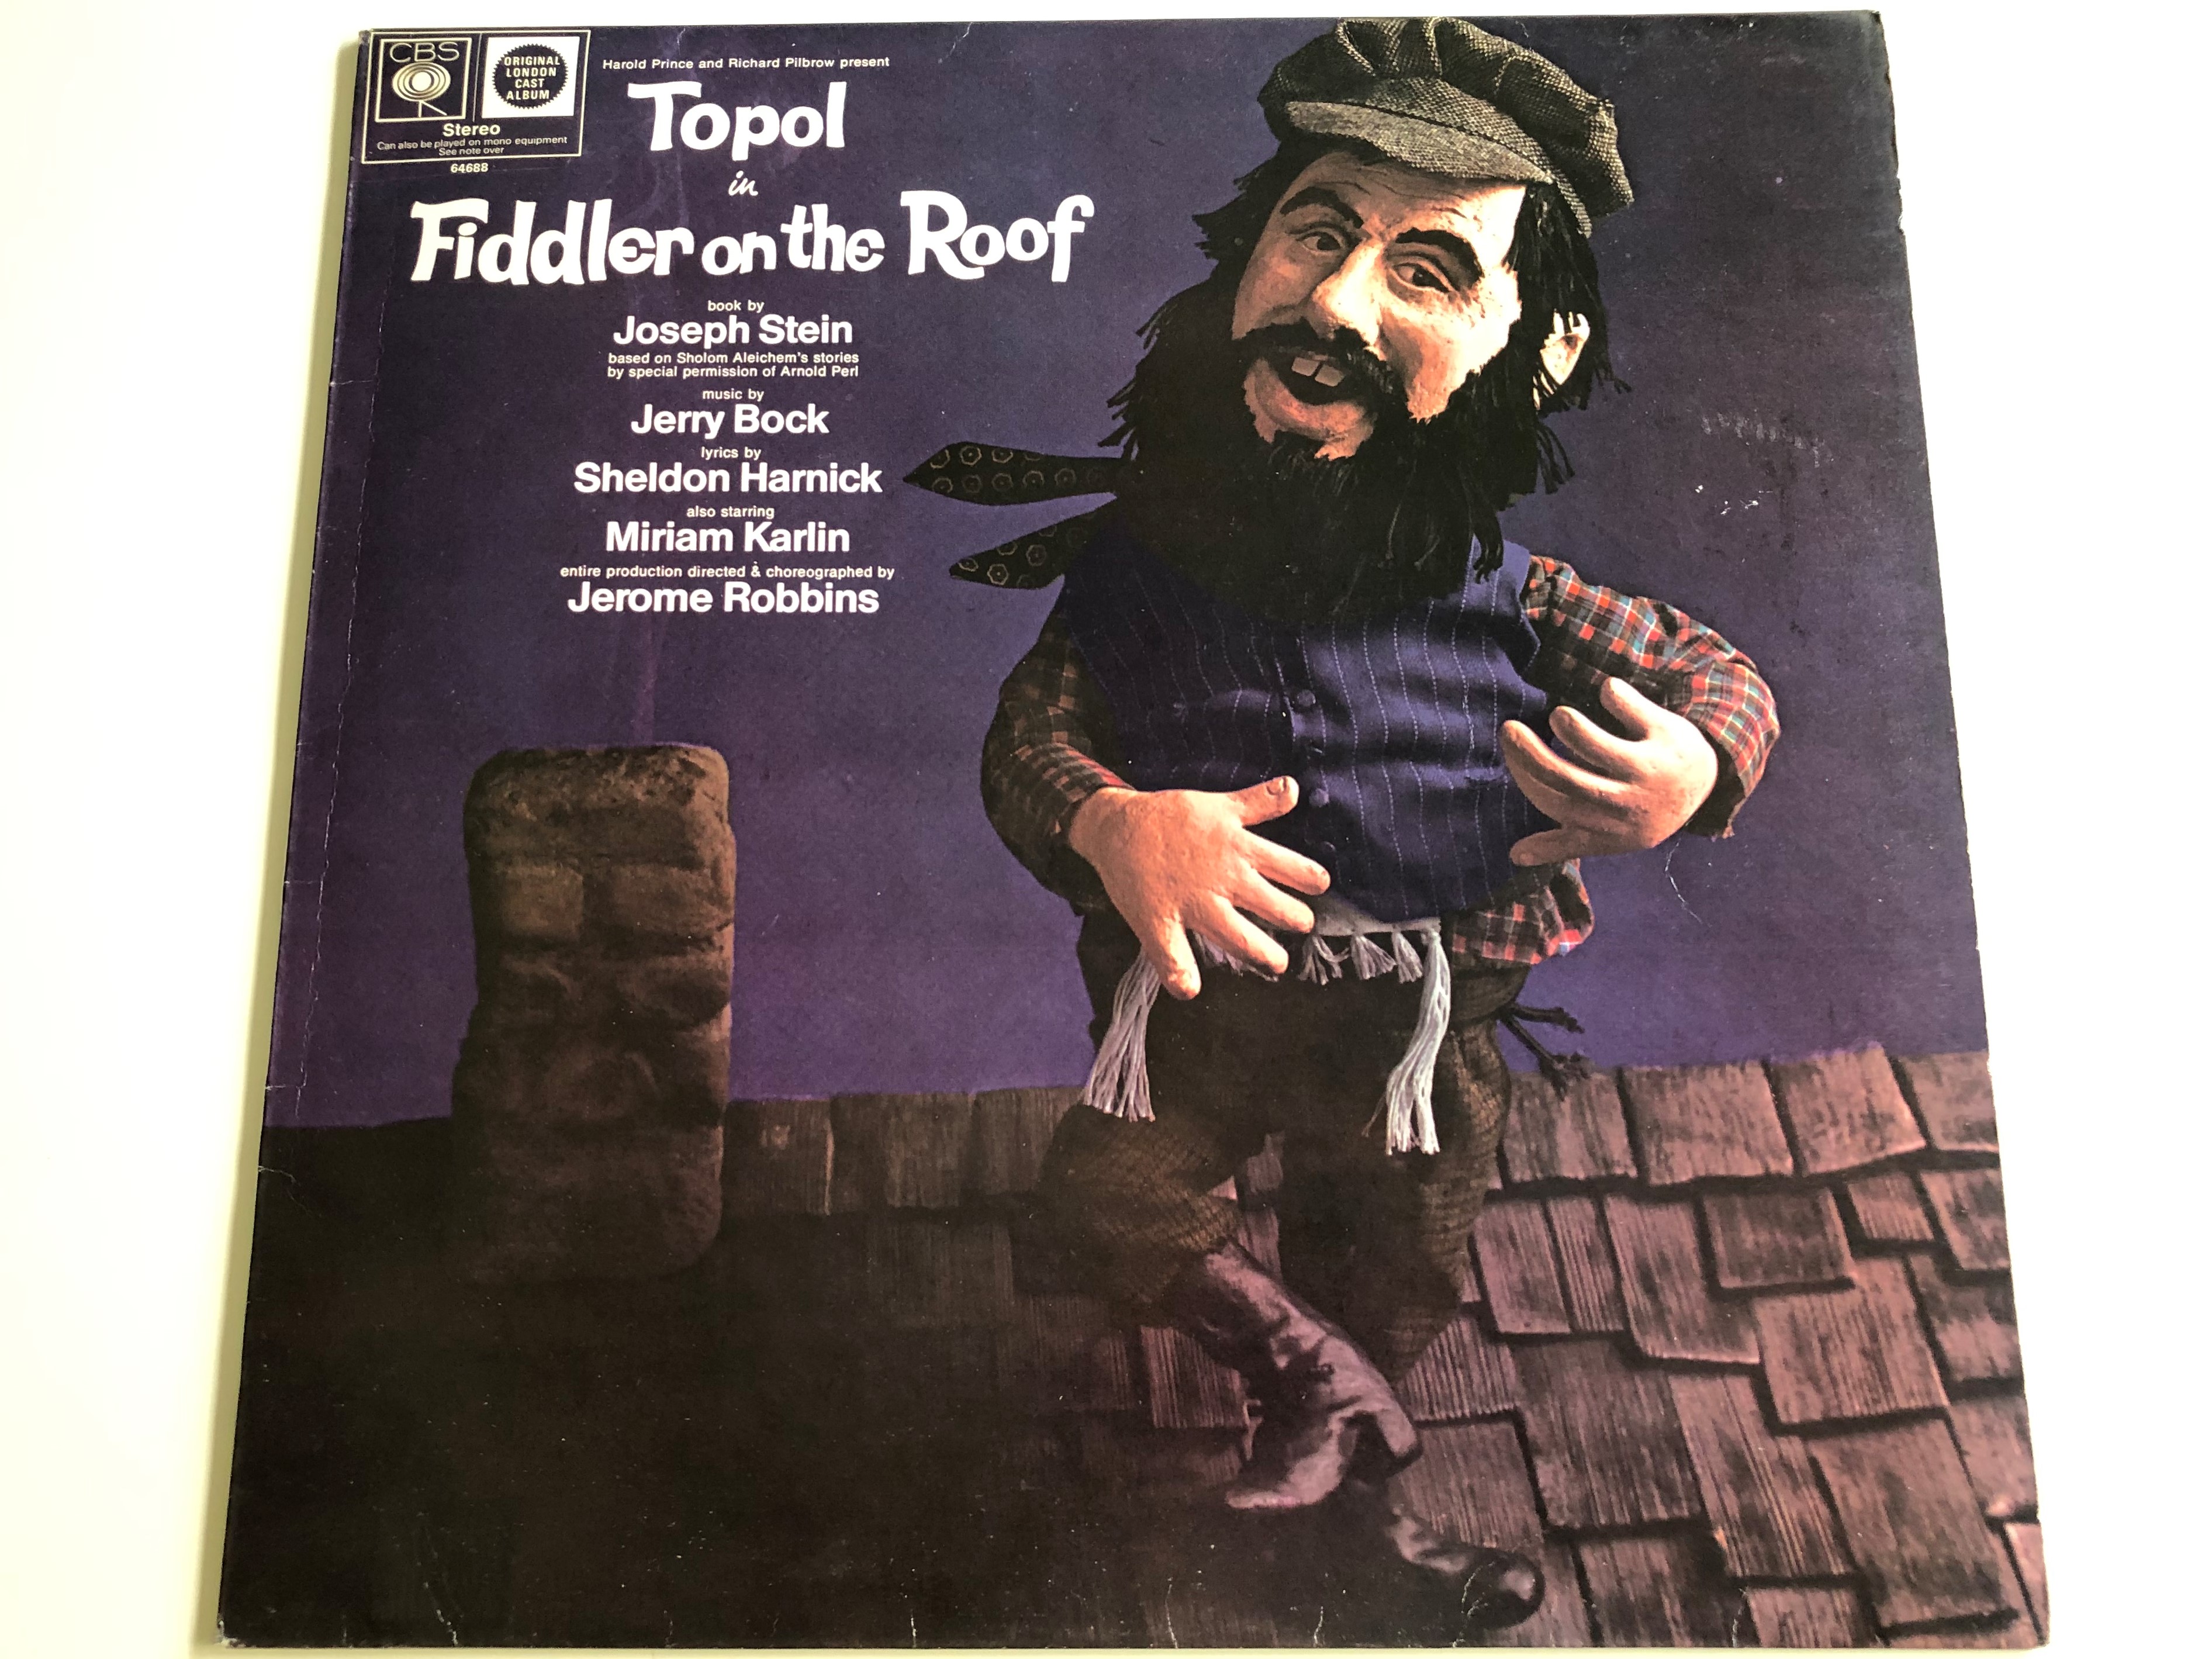 topol-in-fiddler-on-the-roof-original-london-production-by-harold-prince-and-richard-pilbrow-book-by-joseph-stein-music-by-jerry-bock-directed-by-jerome-robbins-starring-miriam-karlin-cbs-1967-stereo-64688-1-.jpg